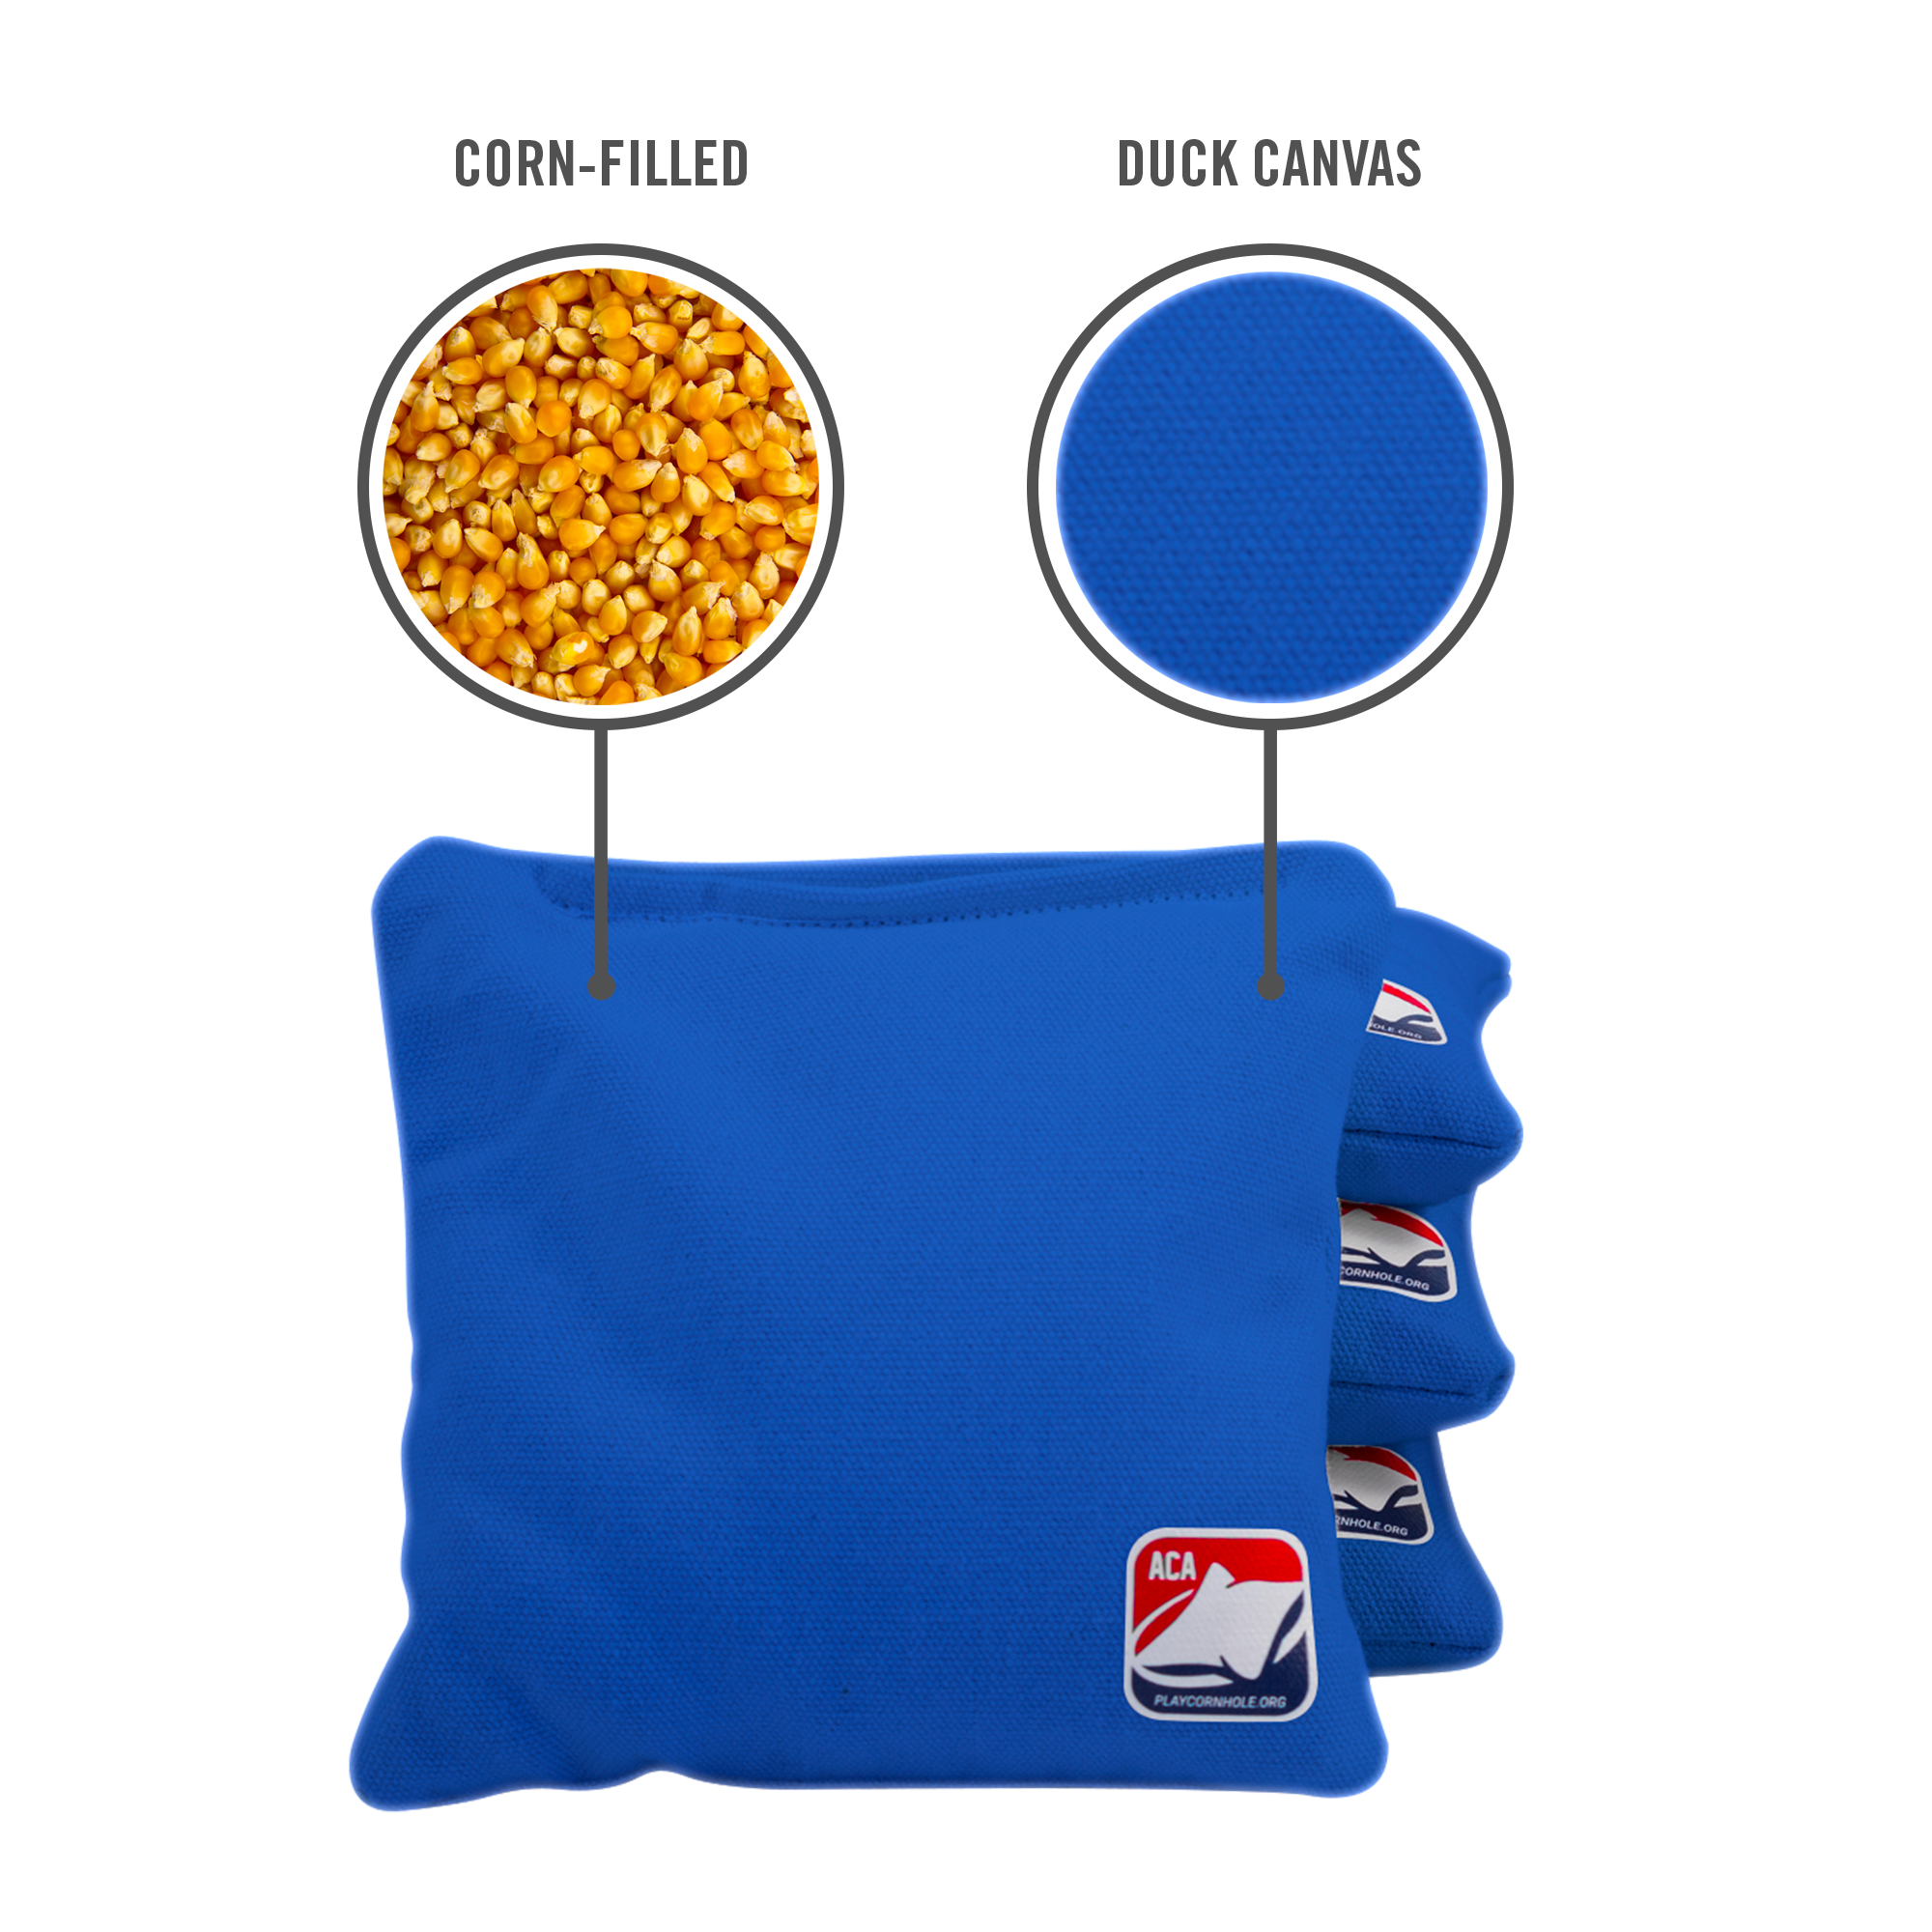 6-in Daily 66 Royal Blue Competition Regulation Cornhole Bags